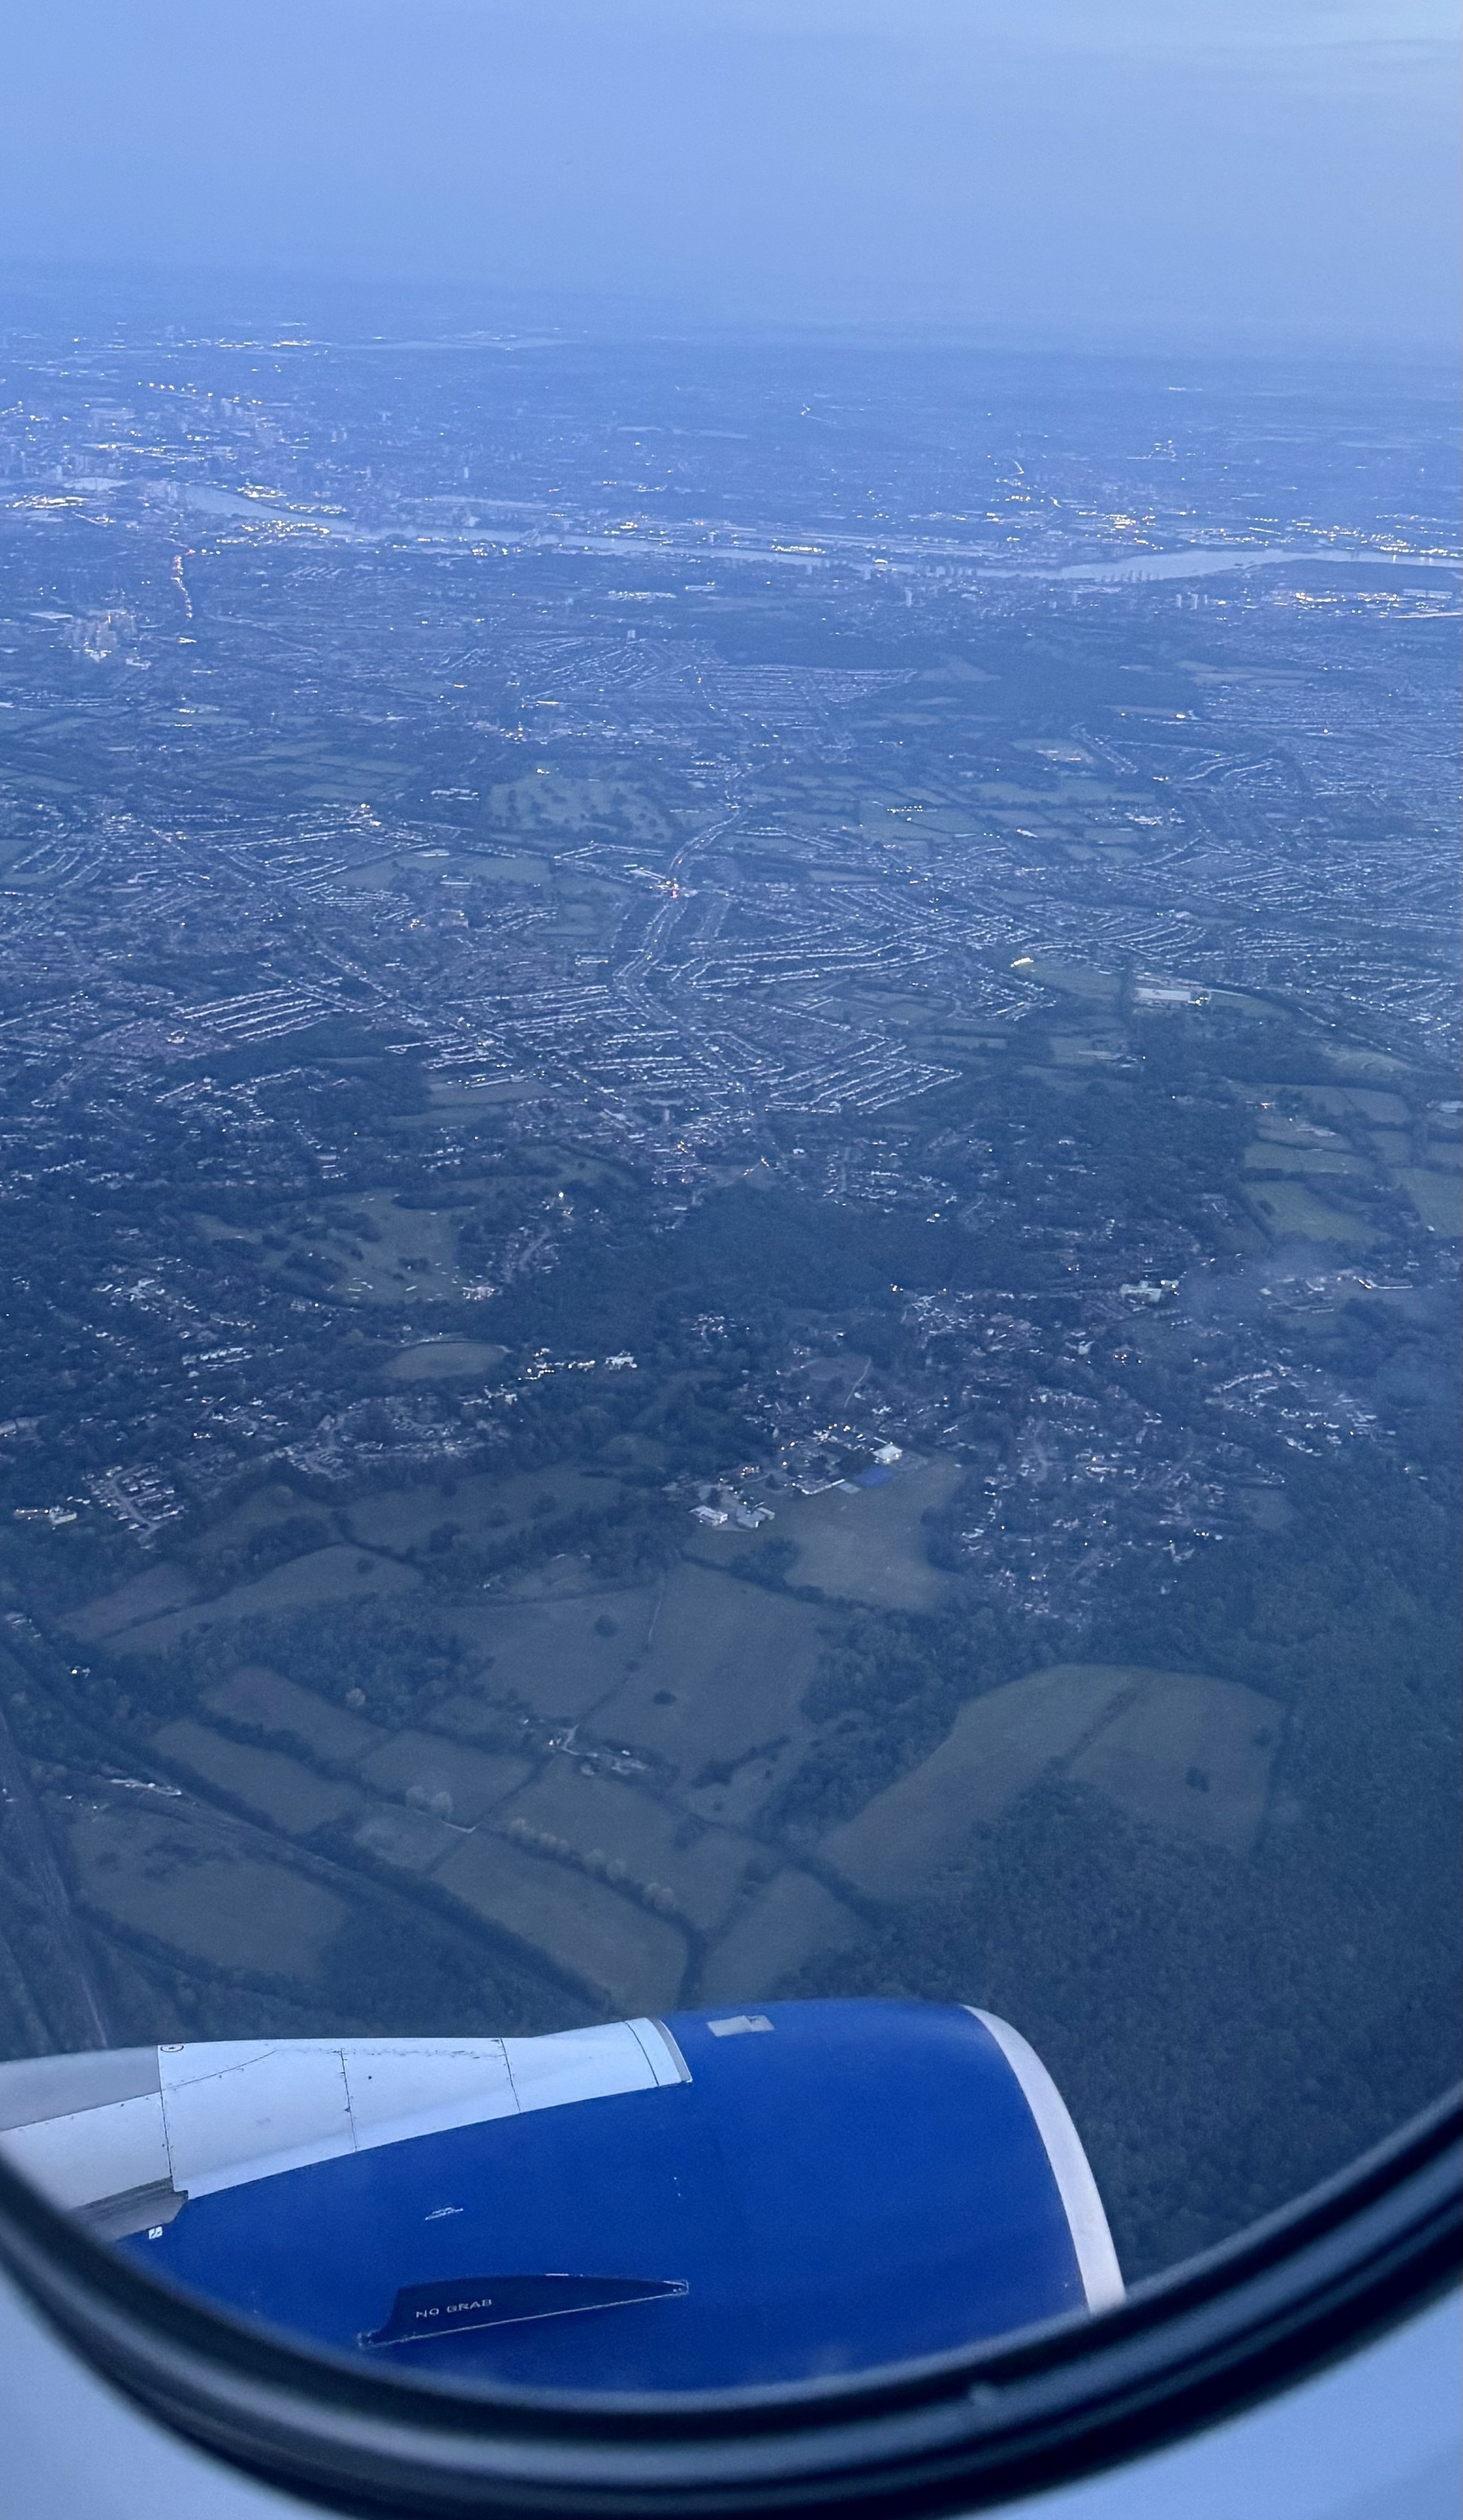 A view of the outskirts of London from the air.